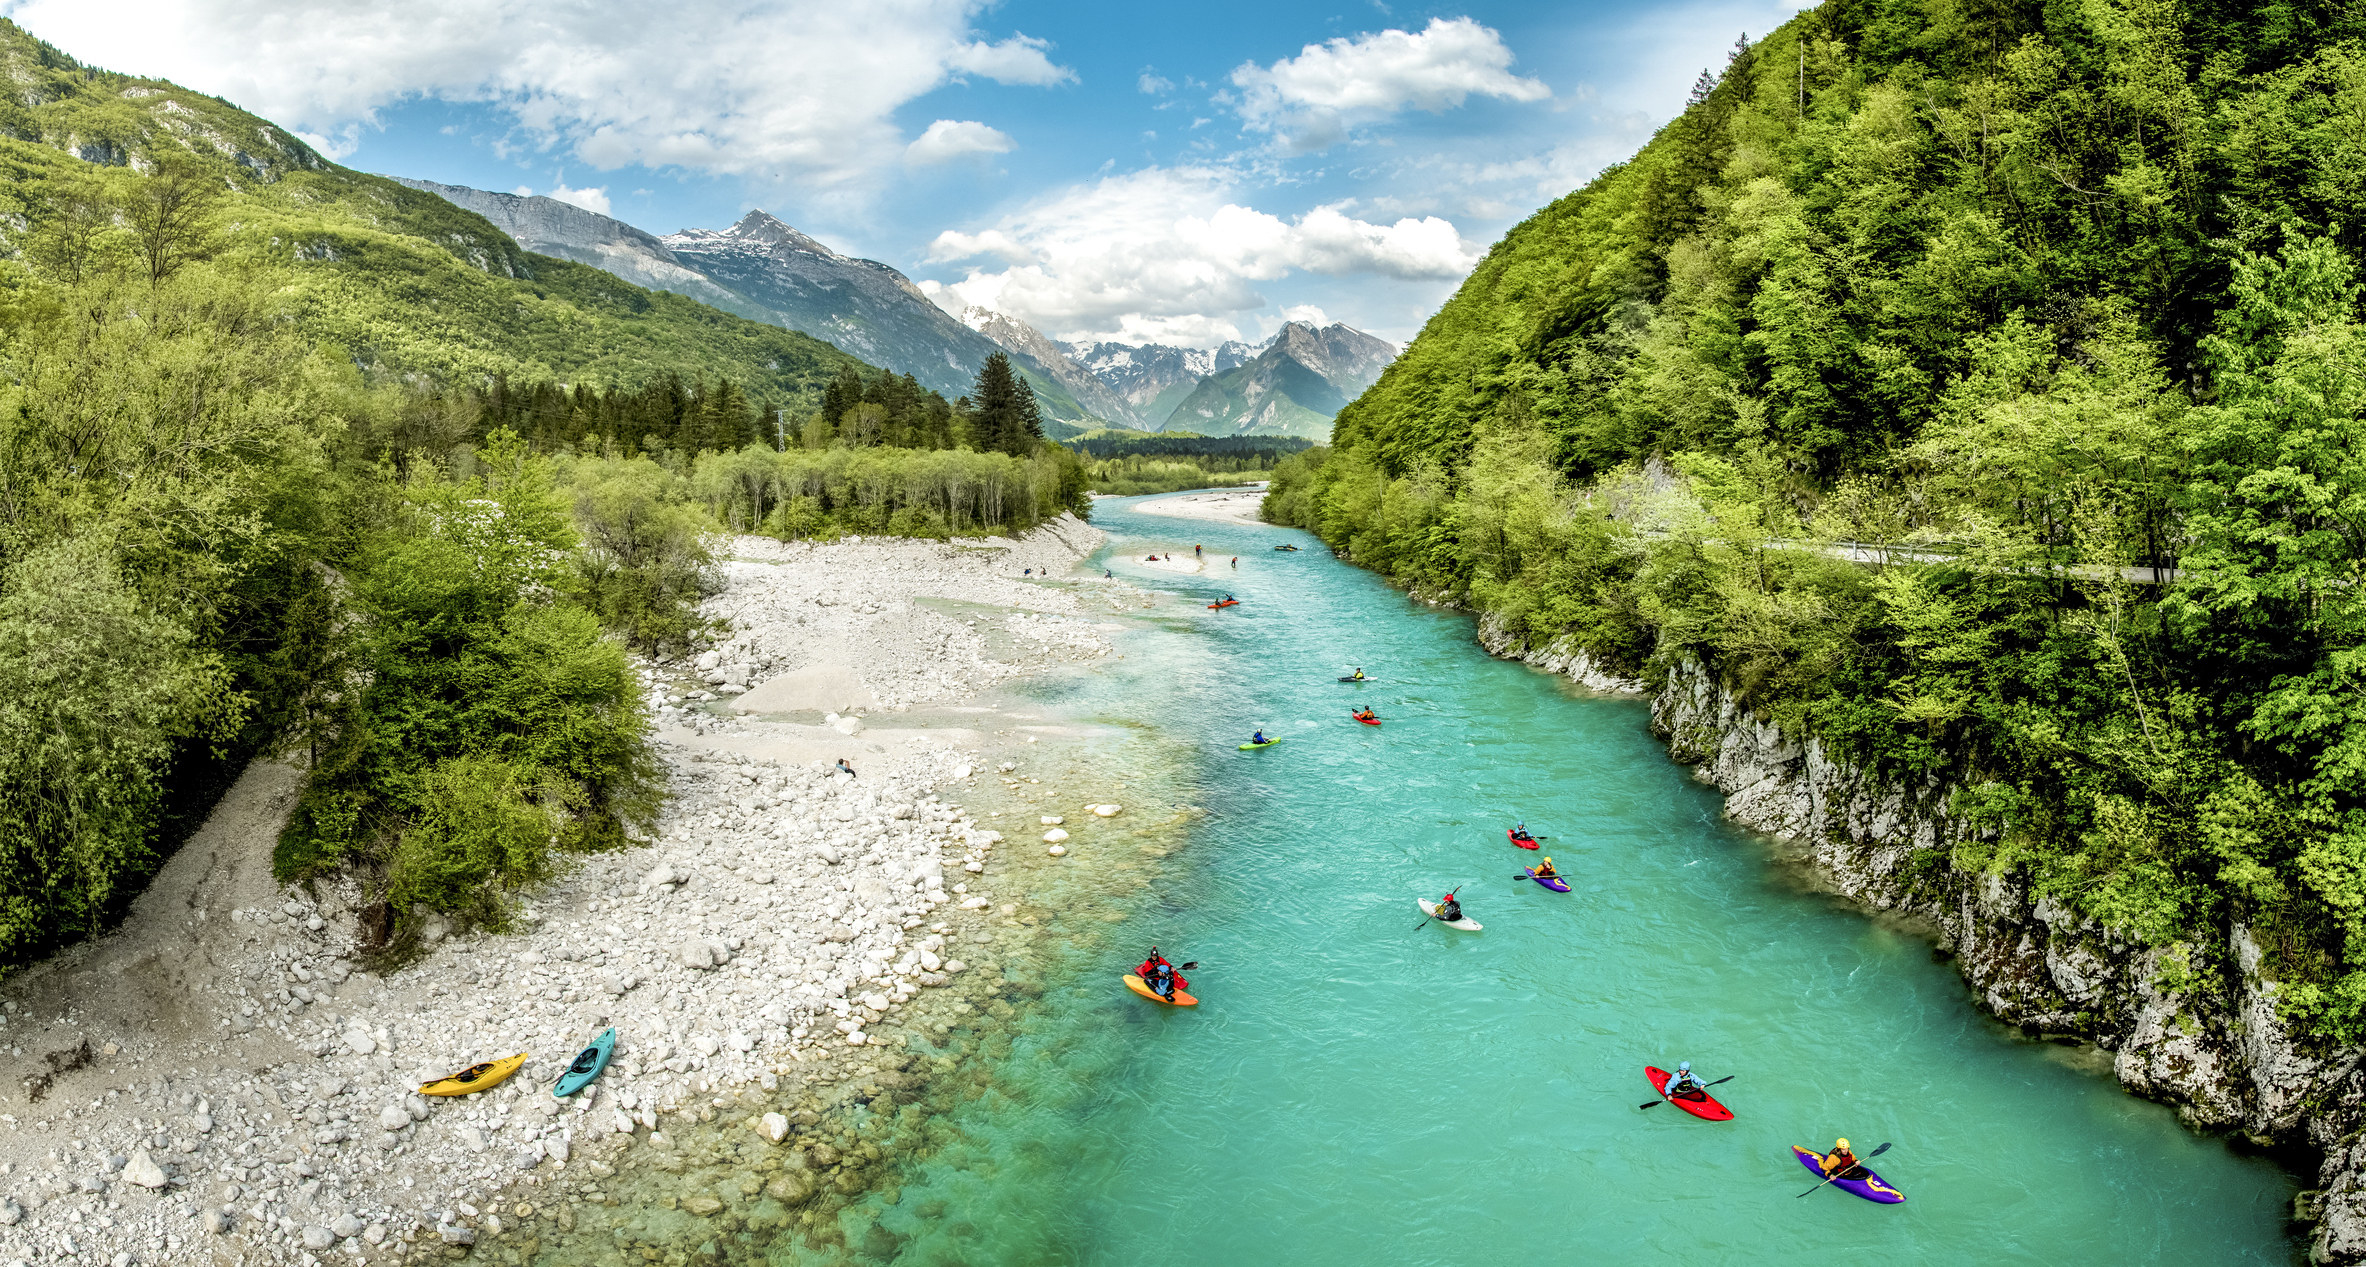 Kayakers on a river in Slovenia